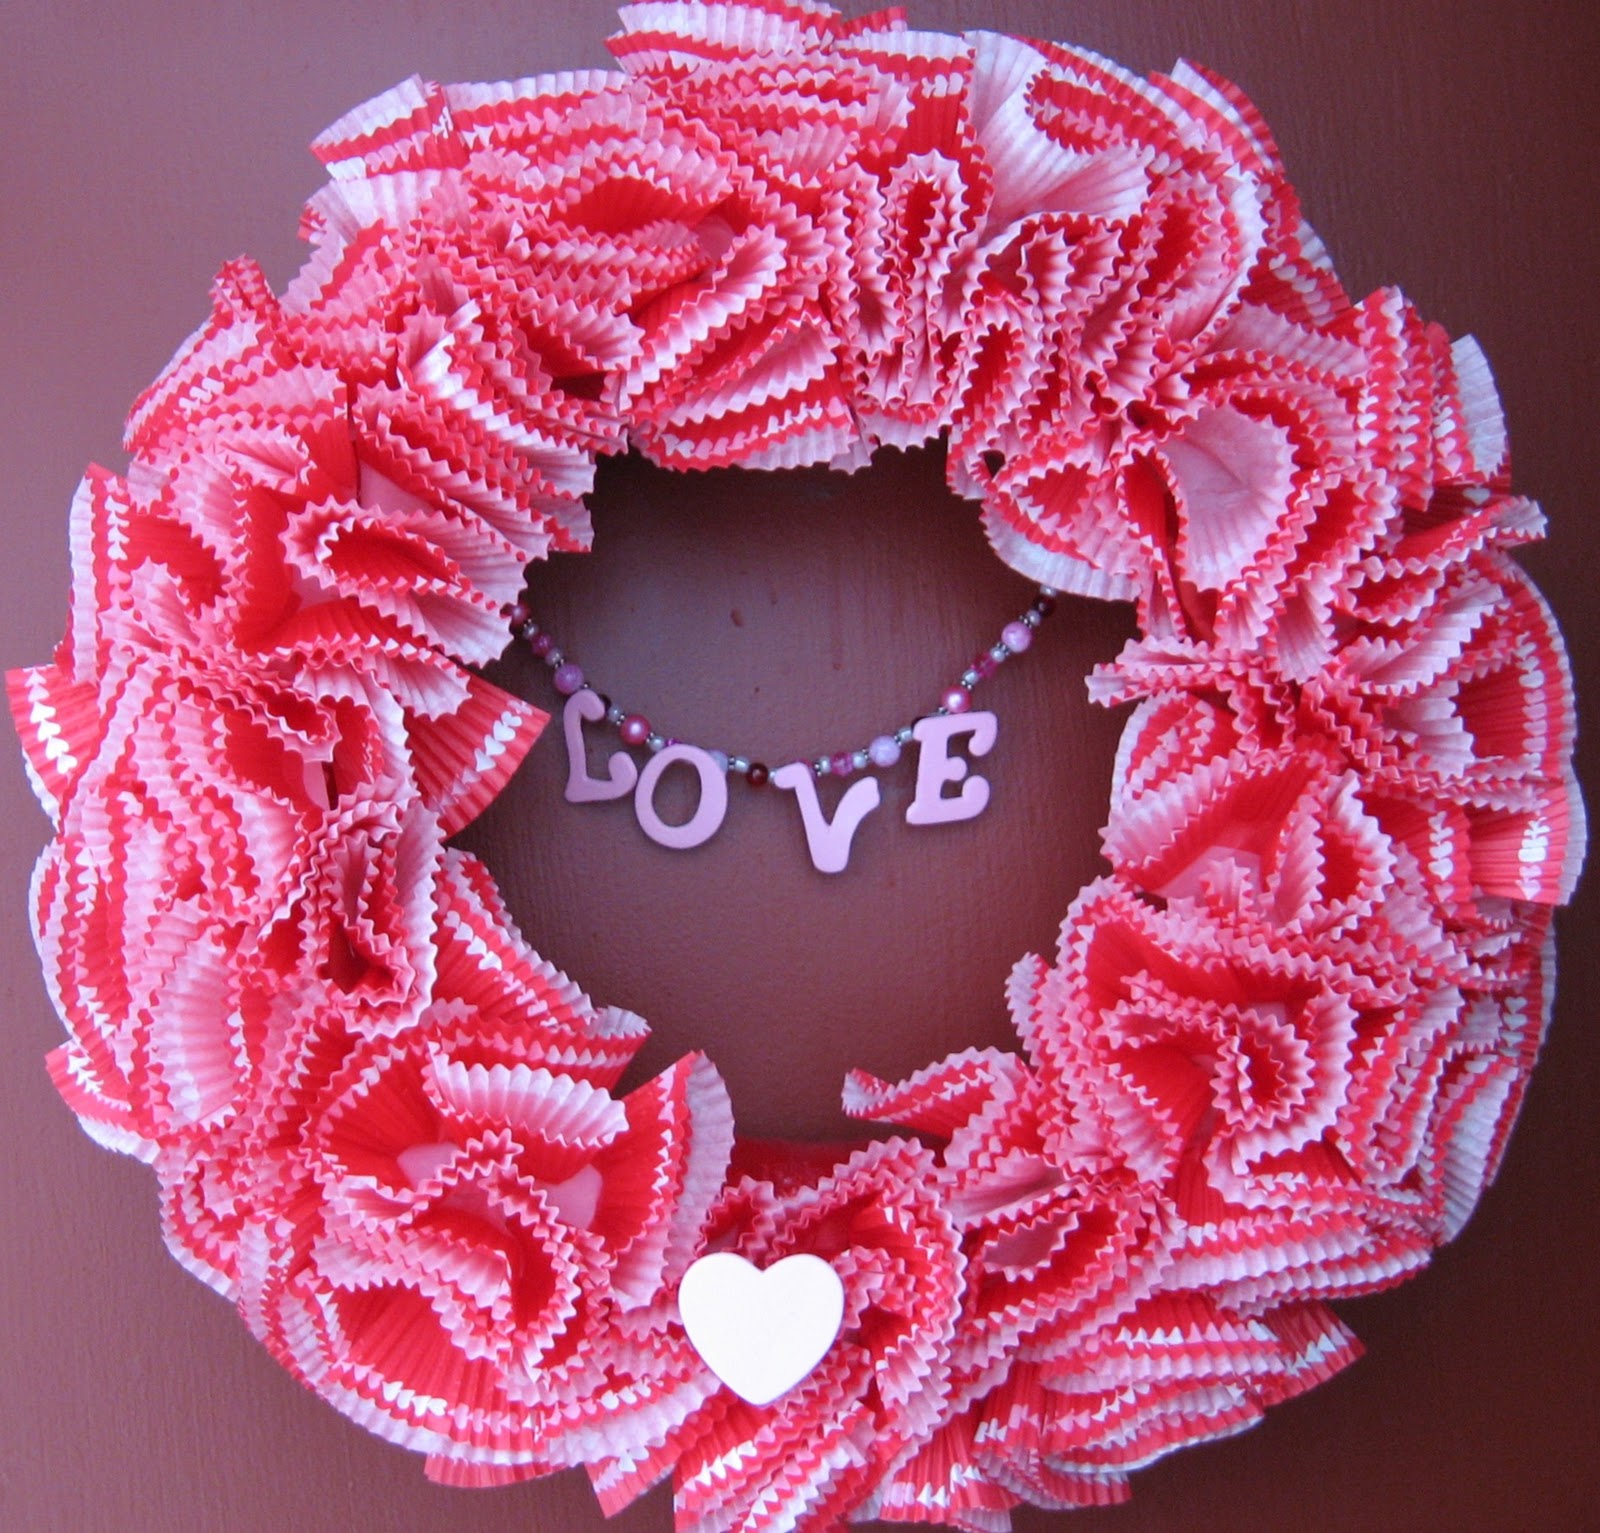 Minimalist Valentine Wreaths To Make for Small Space